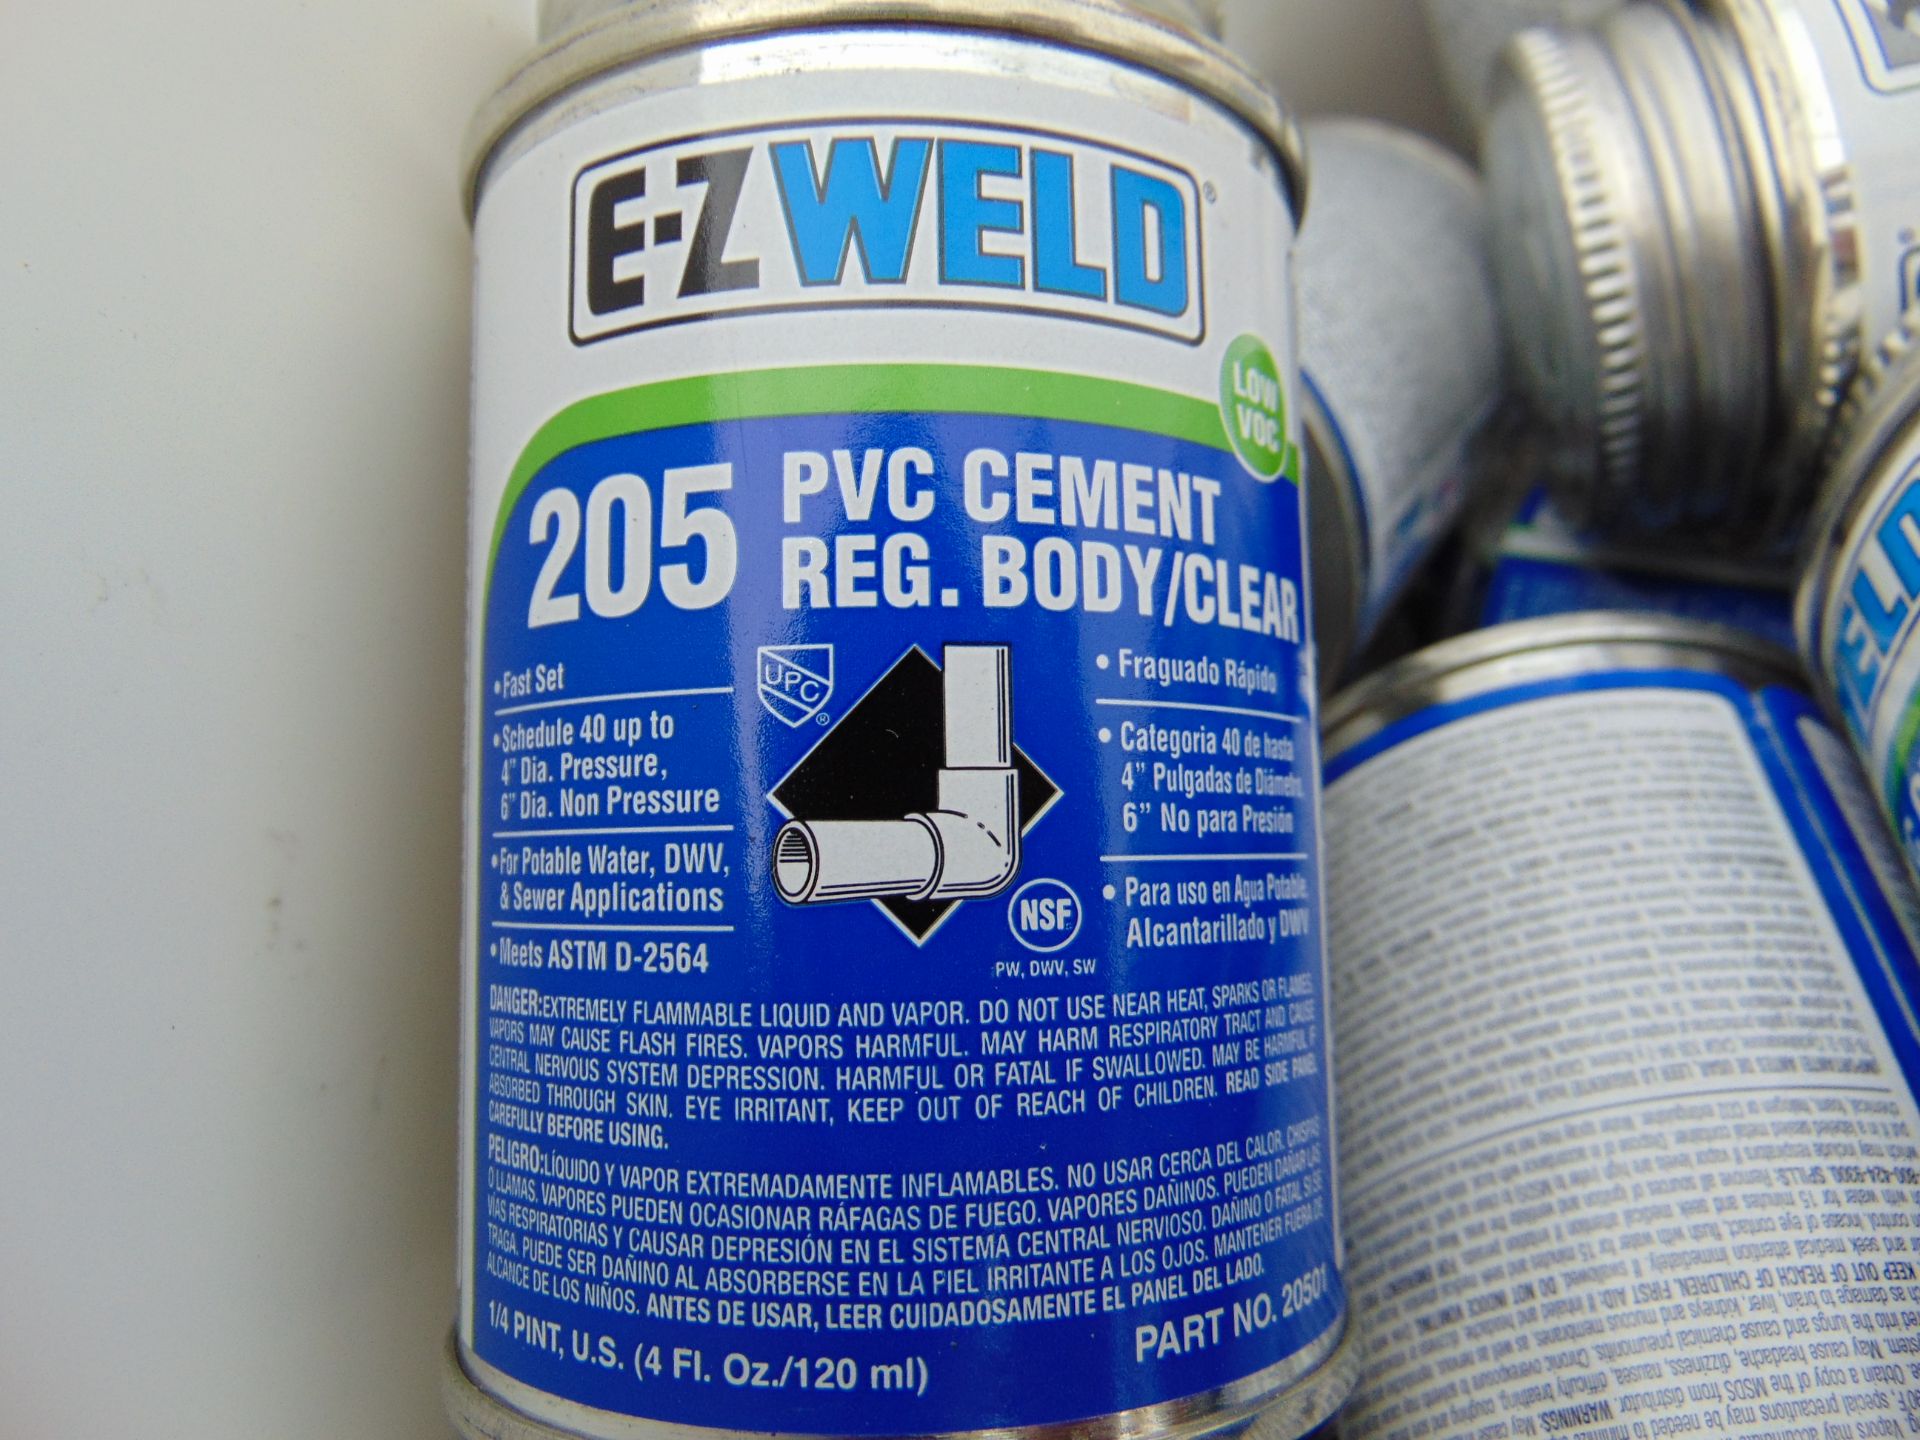 Approx 70 x Tins of E-Z Weld 205 PVC Cement - Image 3 of 3